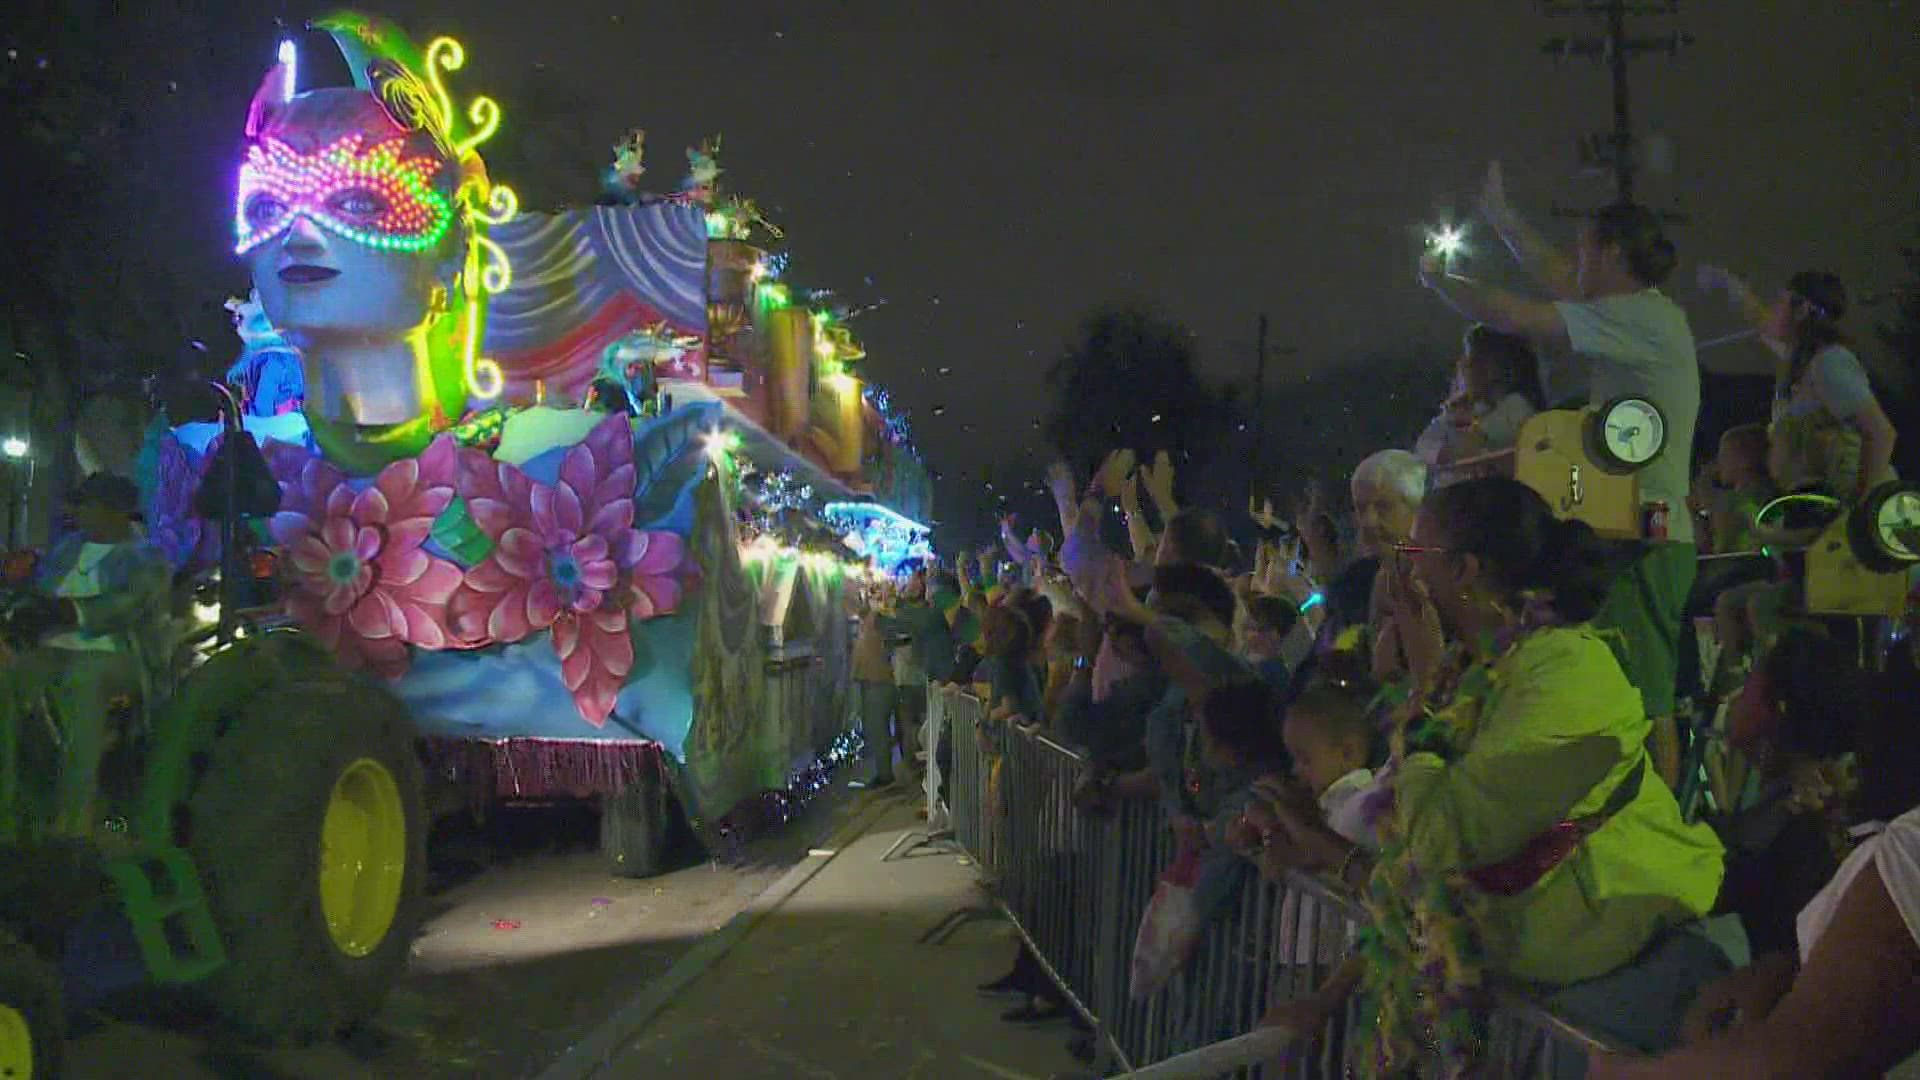 The Krewe of Nyx was once one of, if not the largest parading organization, but now it's one of the smallest and may have a hard time hanging on.